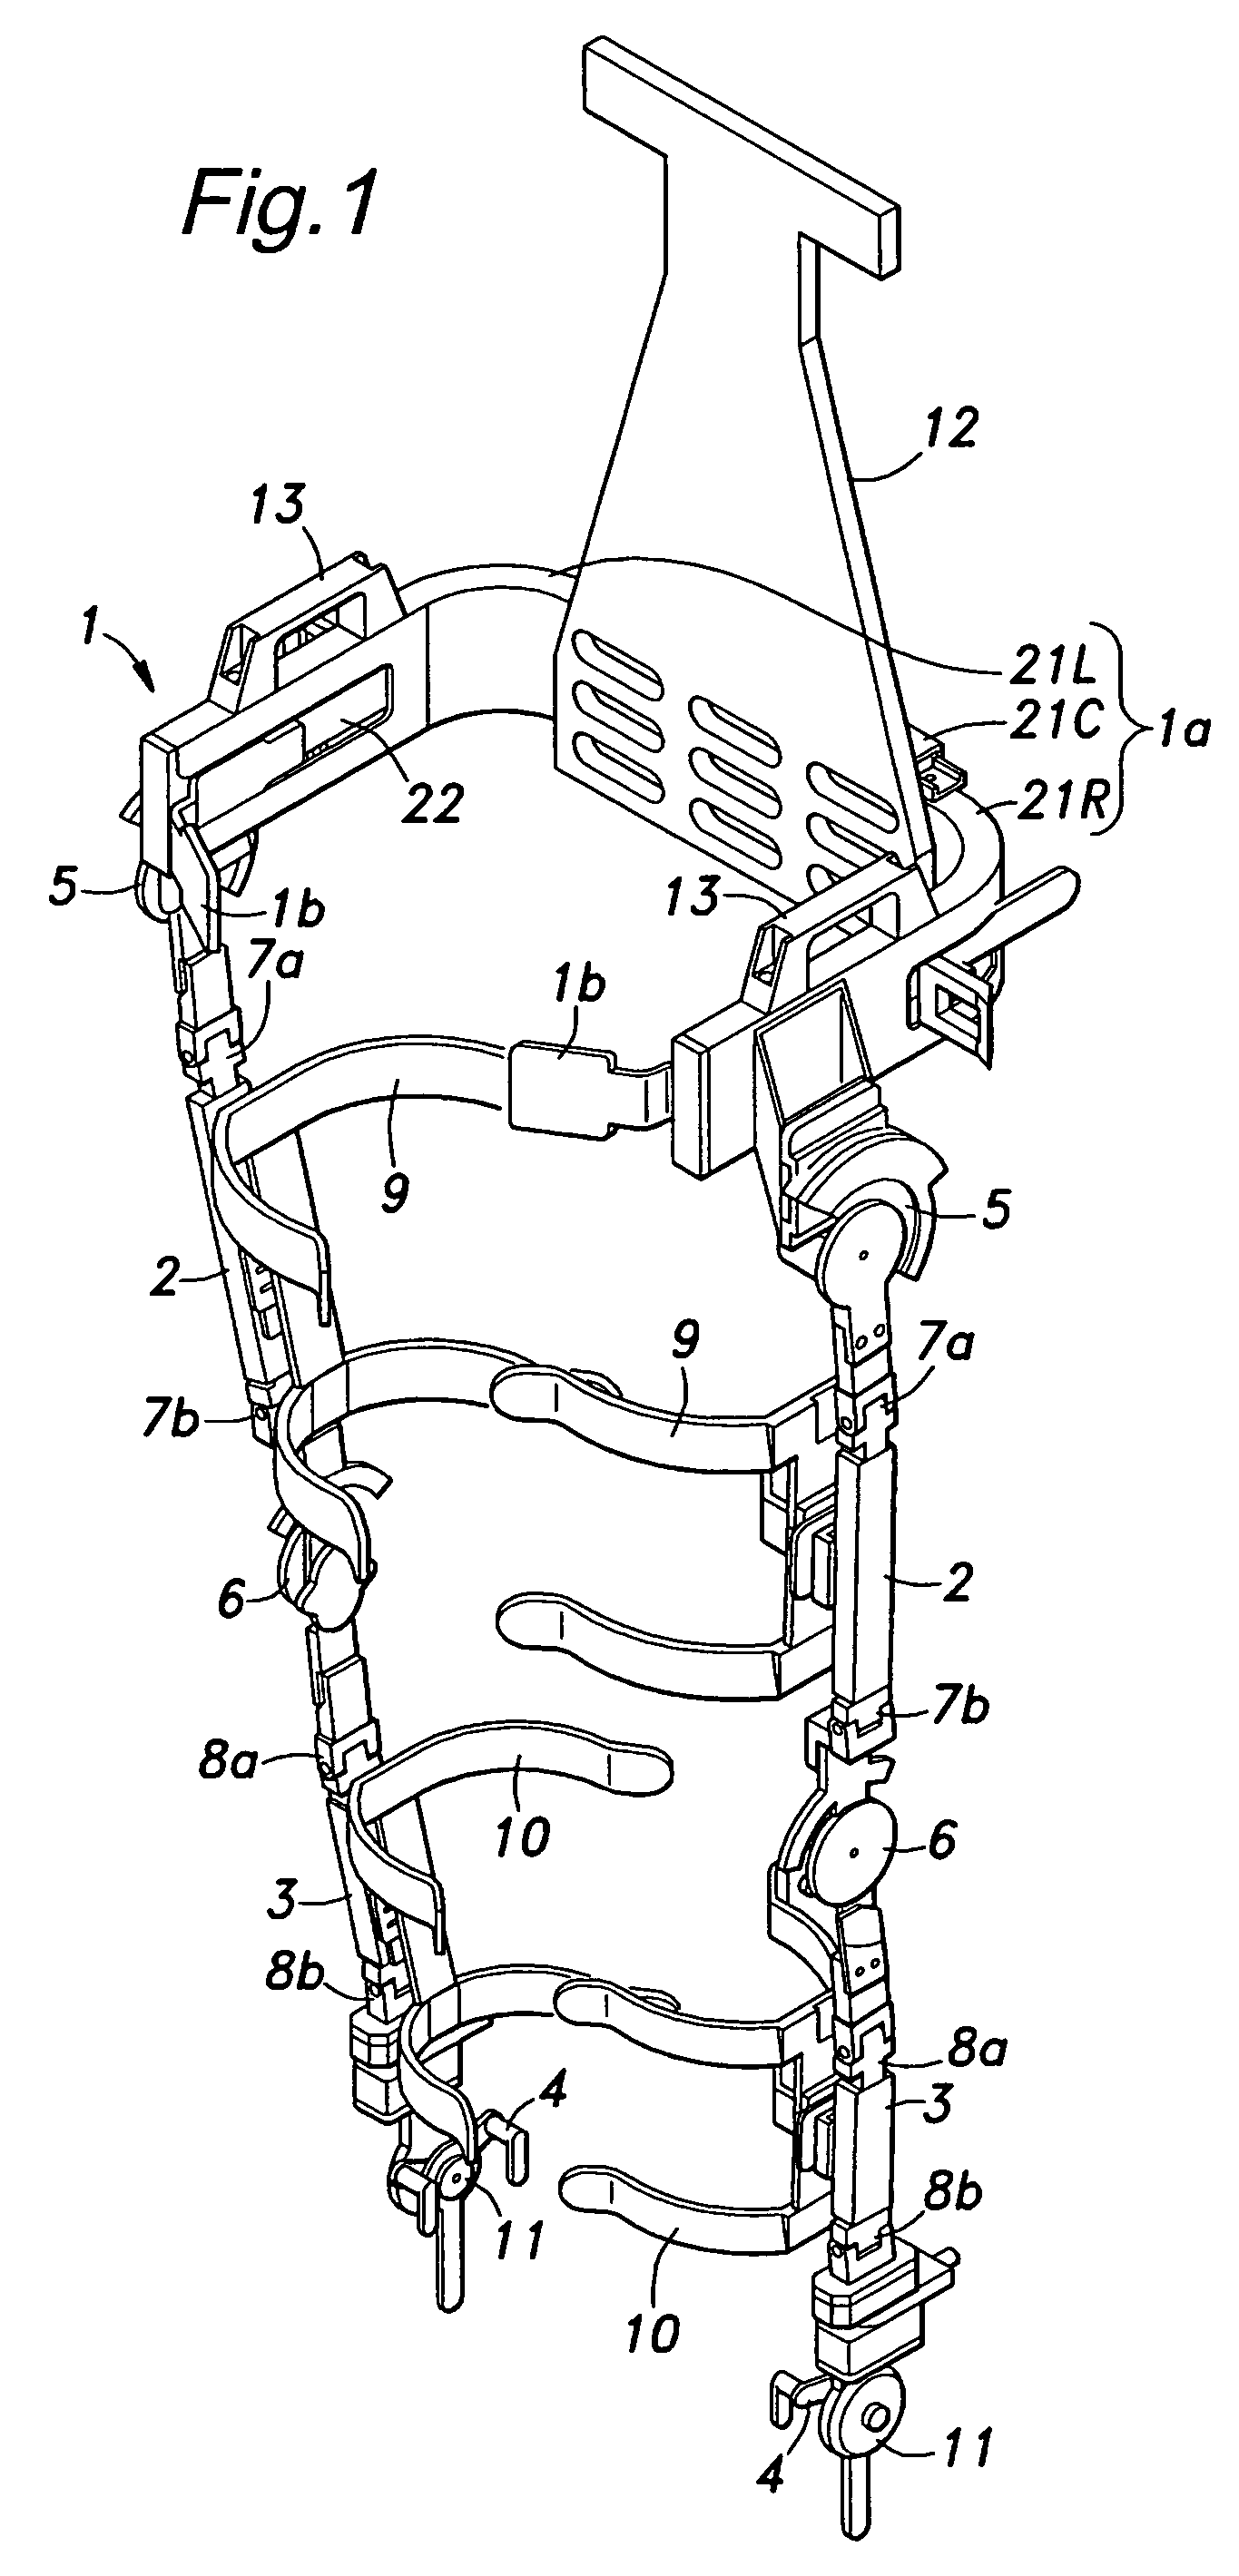 Walking assistance device having a pelvis support member that is easy to wear